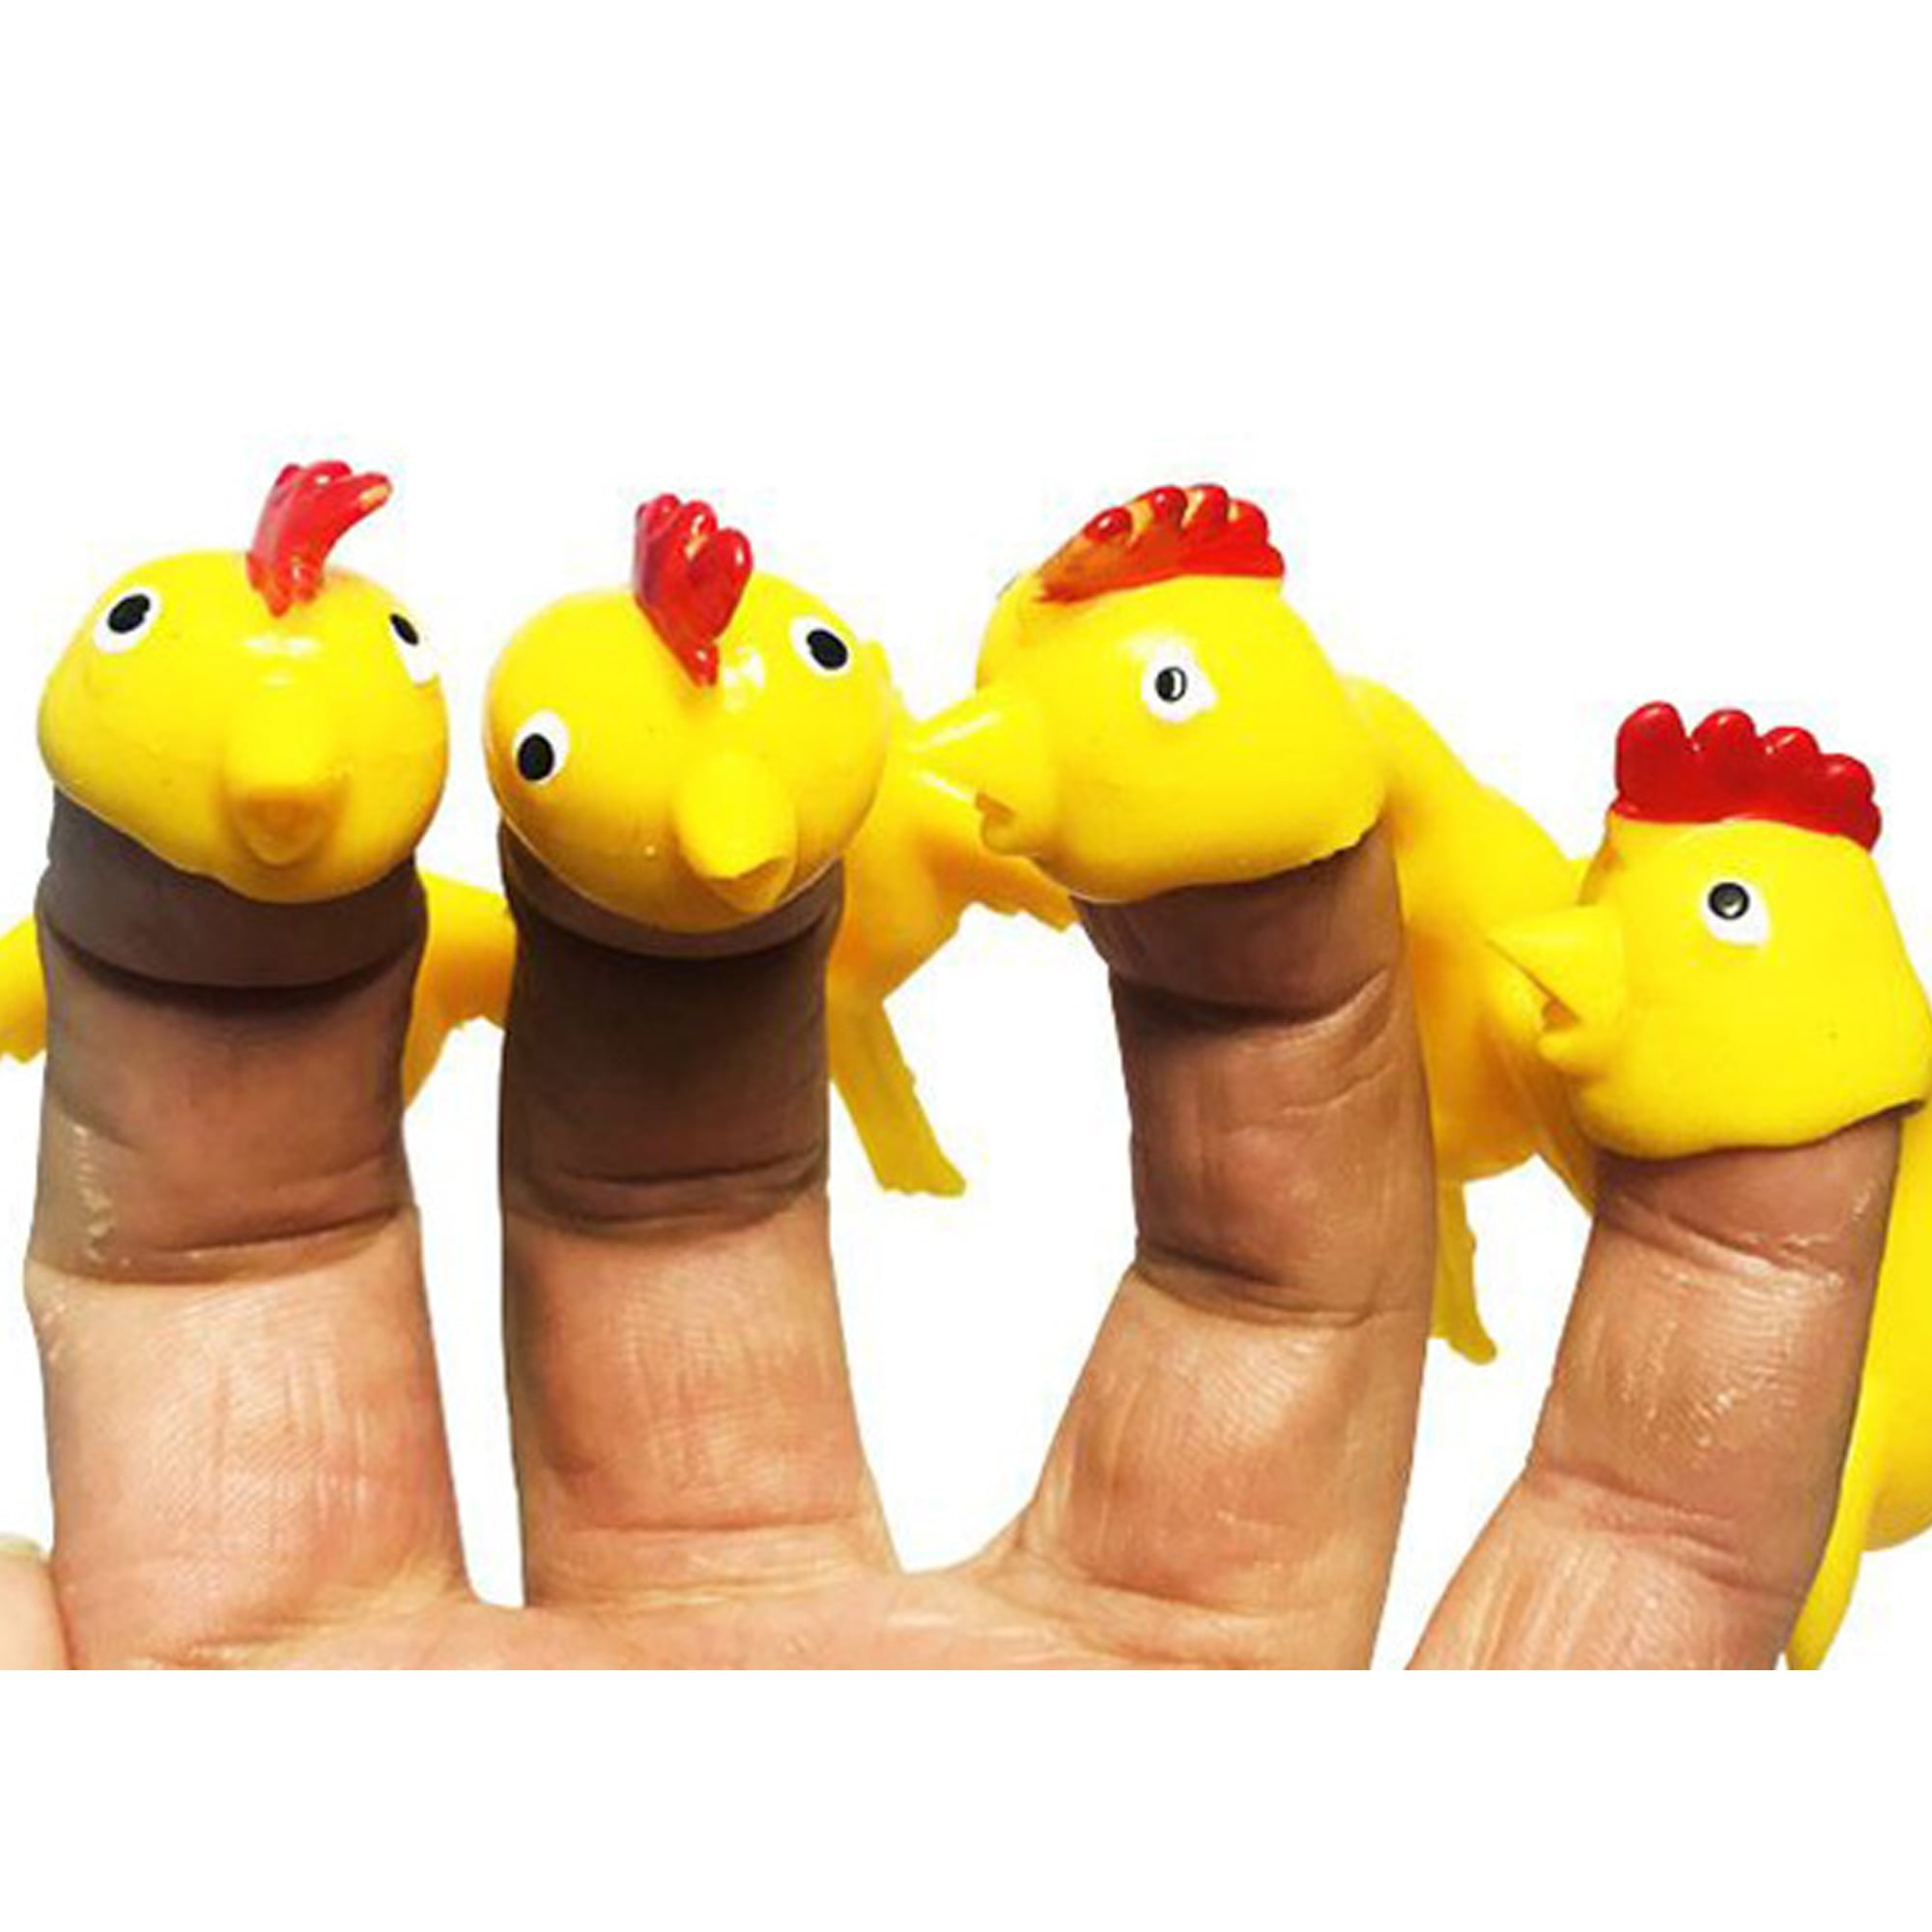 4 PIECES Sticky Stretchy Flying Rubber Chicken Finger Catapult Slingshot bird